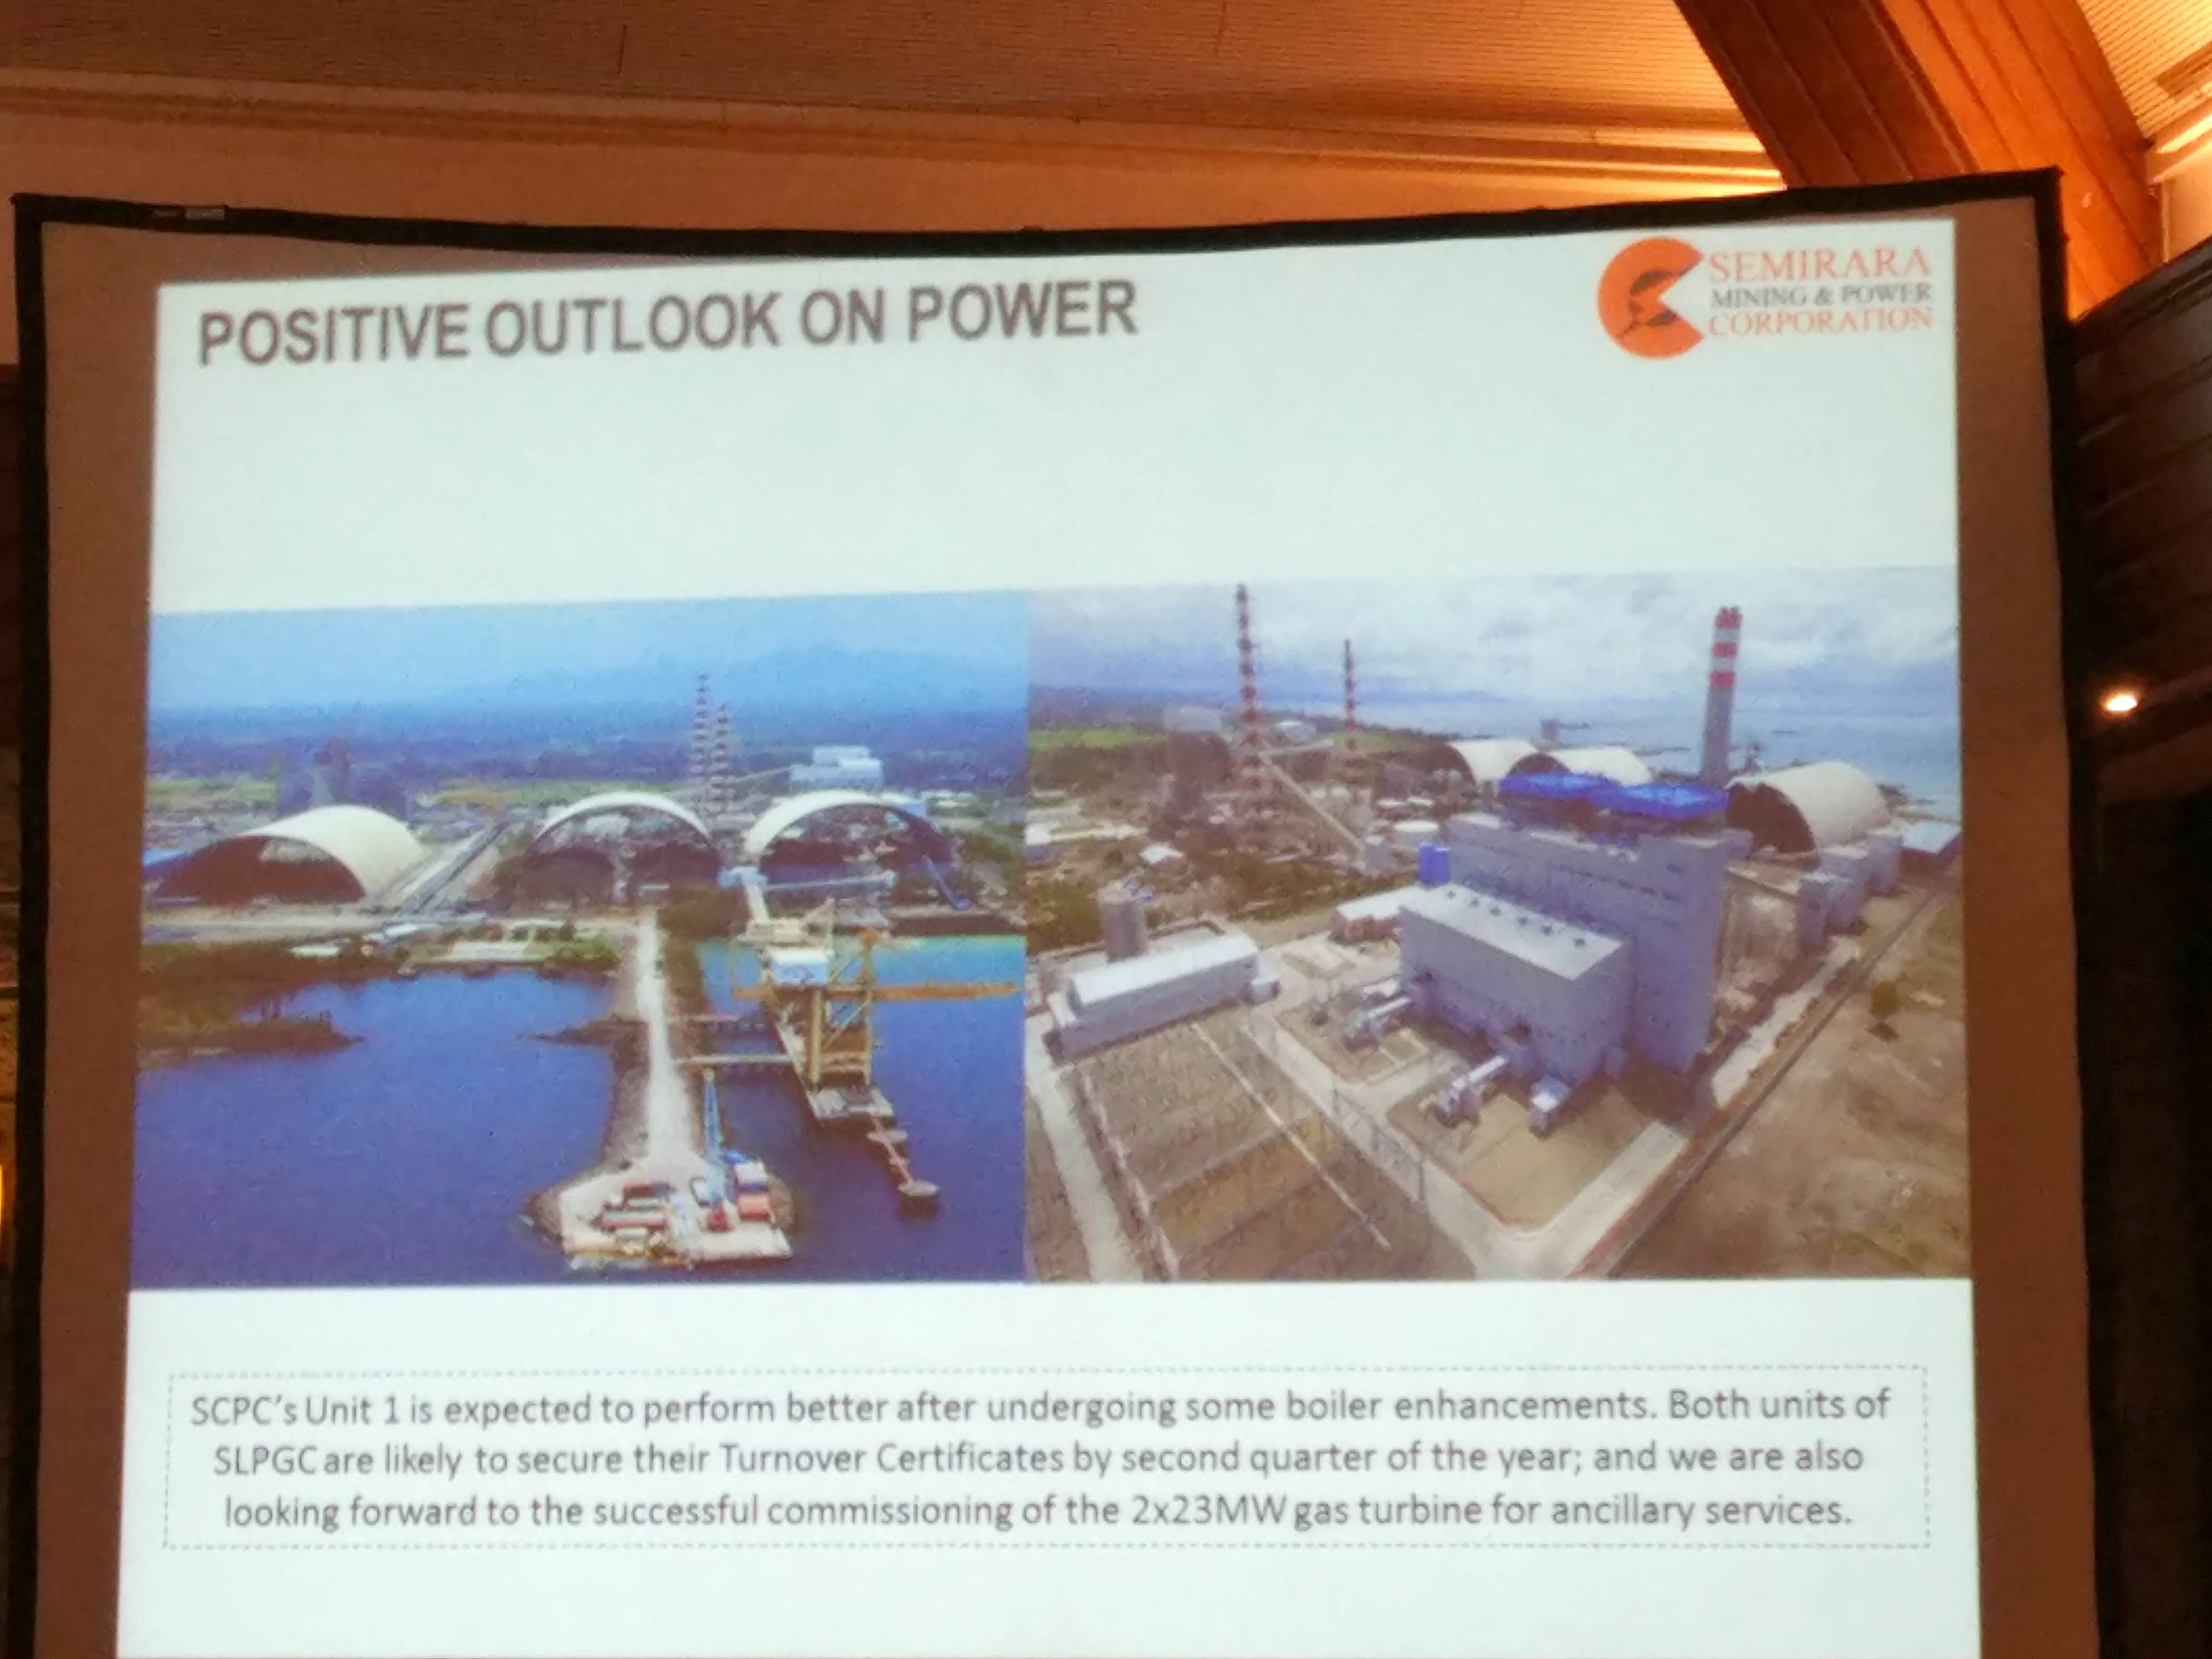 BRIGHT FUTURE. Semirara also has a power generation arm in Calaca, Batangas that accounted for around half of its net income last year. Sem-Calaca Power Corporation (SCP) accounts for Calaca units 1 and 2 and Southwest Luzon Power Generation Corporation (SLPGC) accounts for units 3 and 4.   